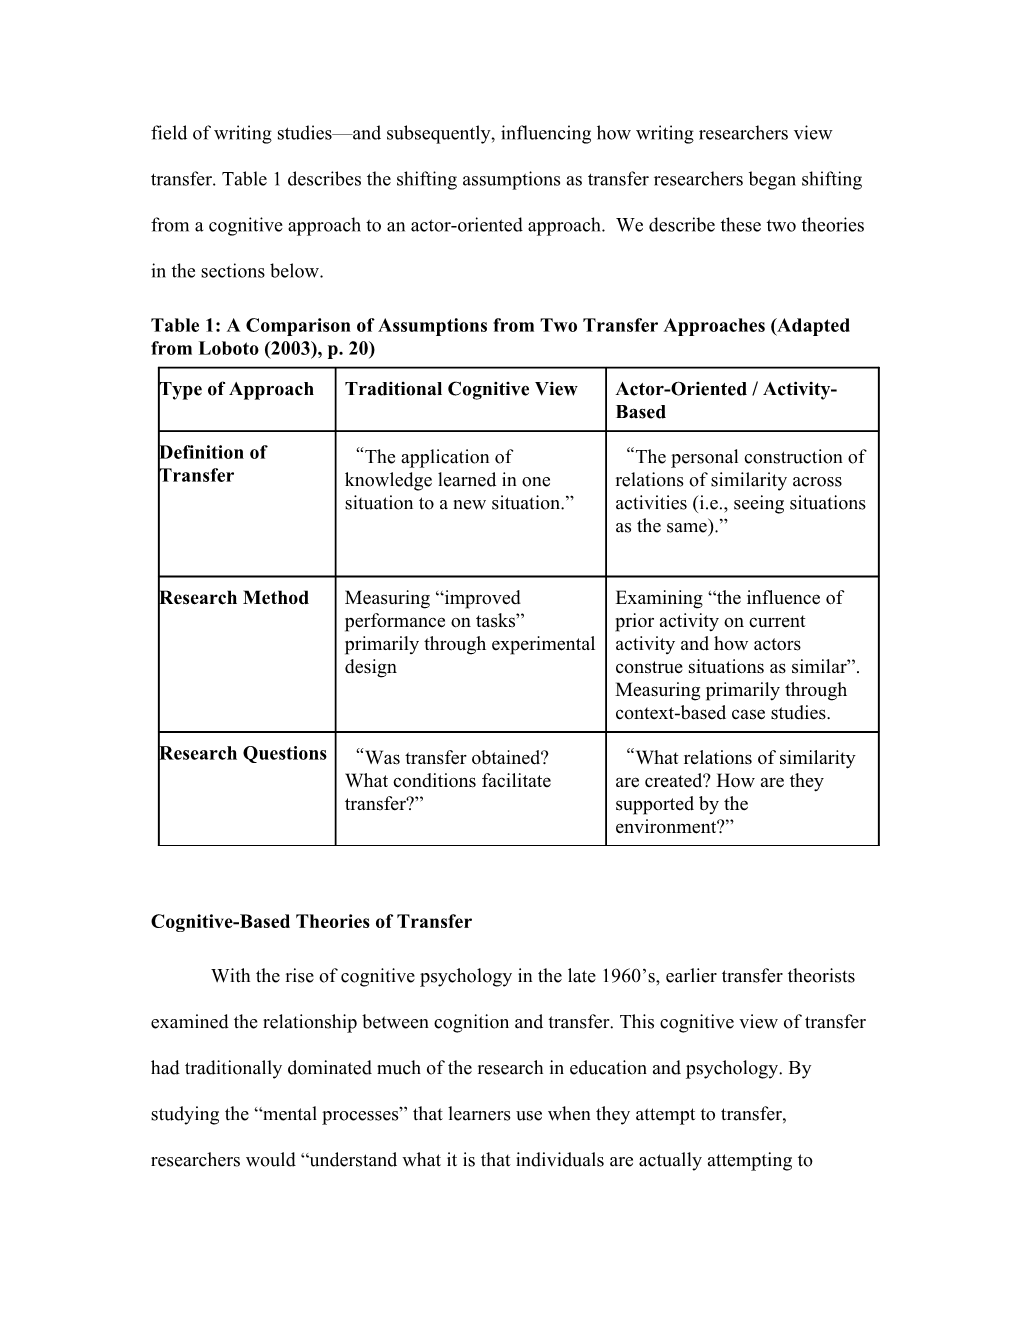 Toward an Integrated Model of Writing Transfer: the Impact of the Individual